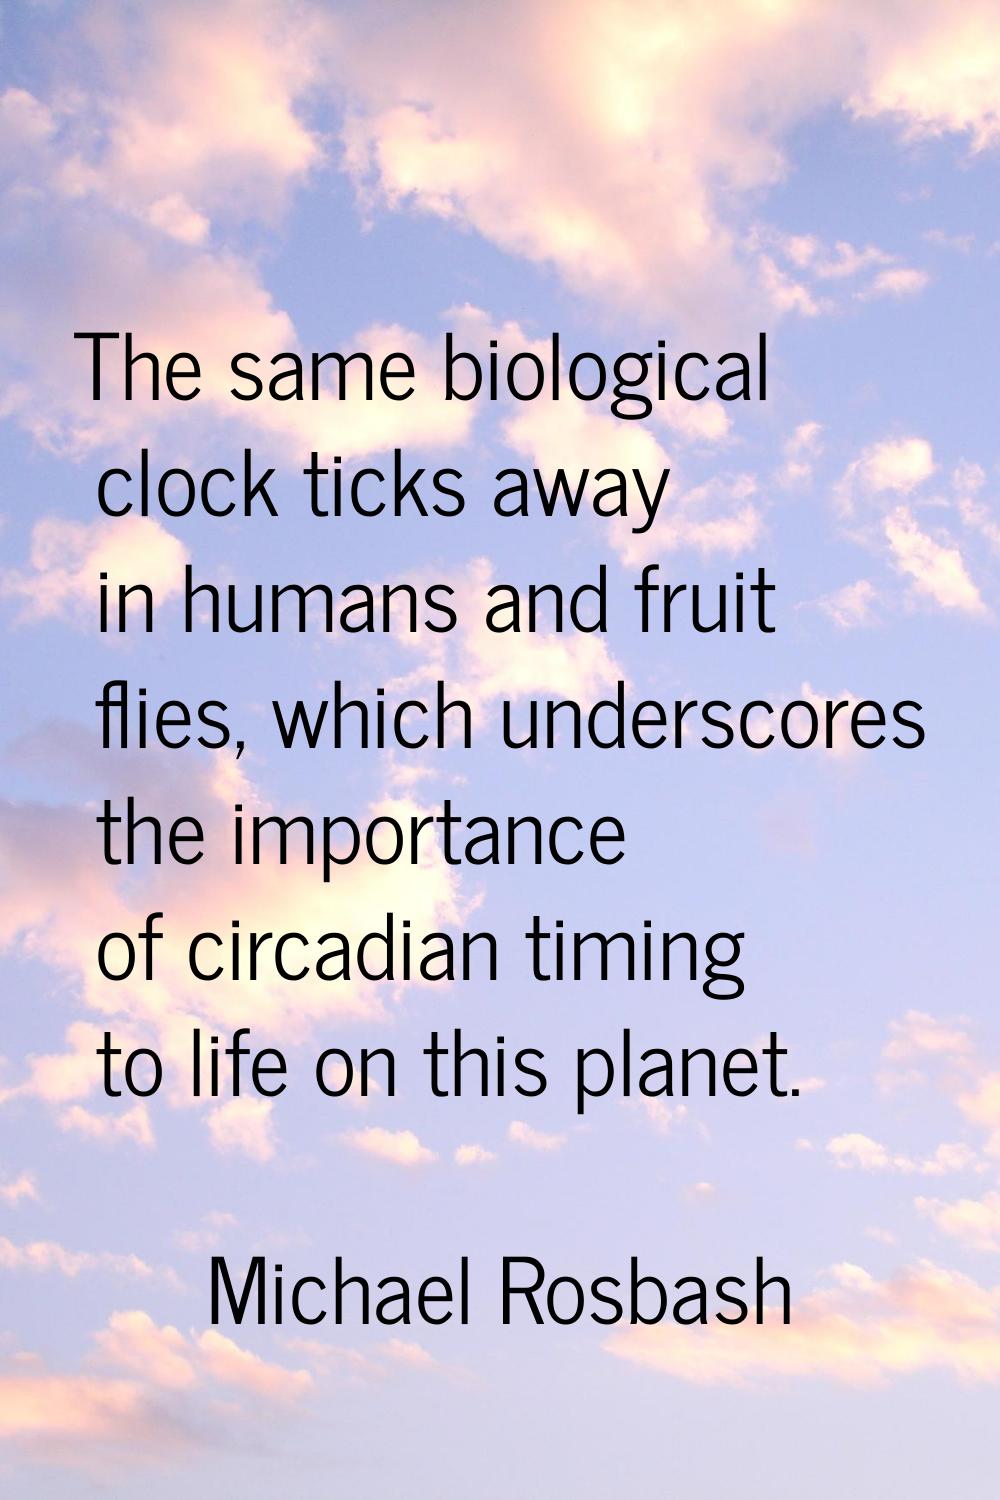 The same biological clock ticks away in humans and fruit flies, which underscores the importance of